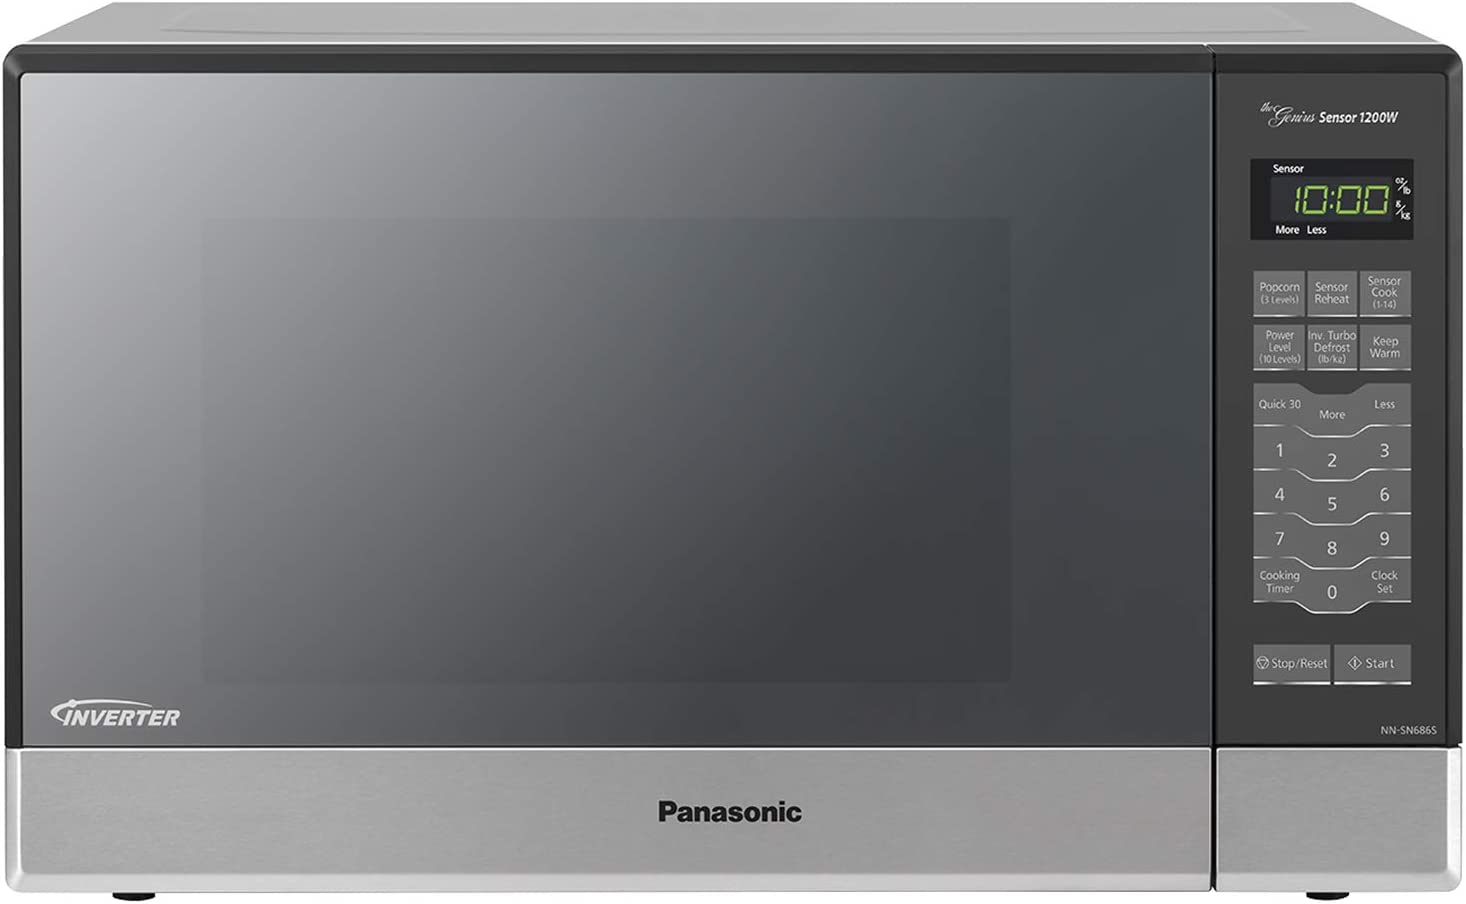 Panasonic Microwave Oven NN-SN686S Stainless Steel Countertop Built-In with Inverter Technology and Genius Sensor, 1.2 Cubic Foot, 1200W